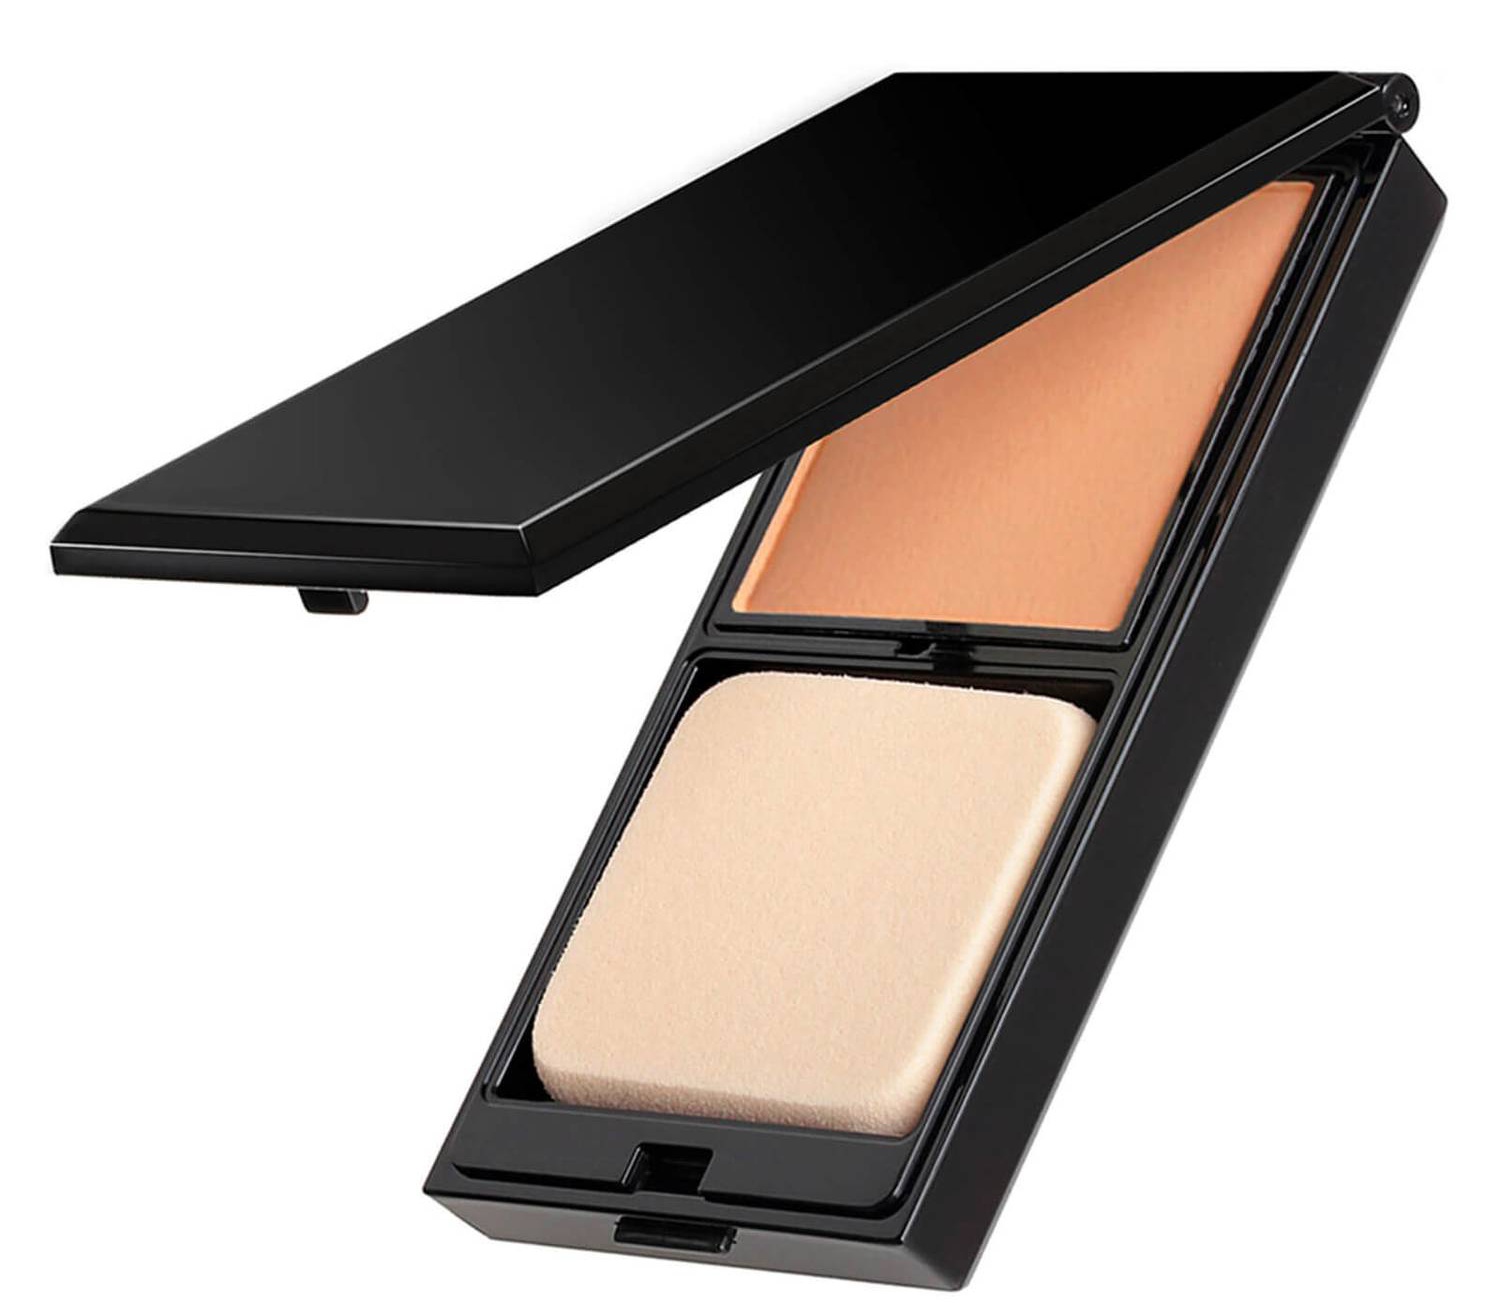 Serge Lutens Teint Si Fin Compact Foundation